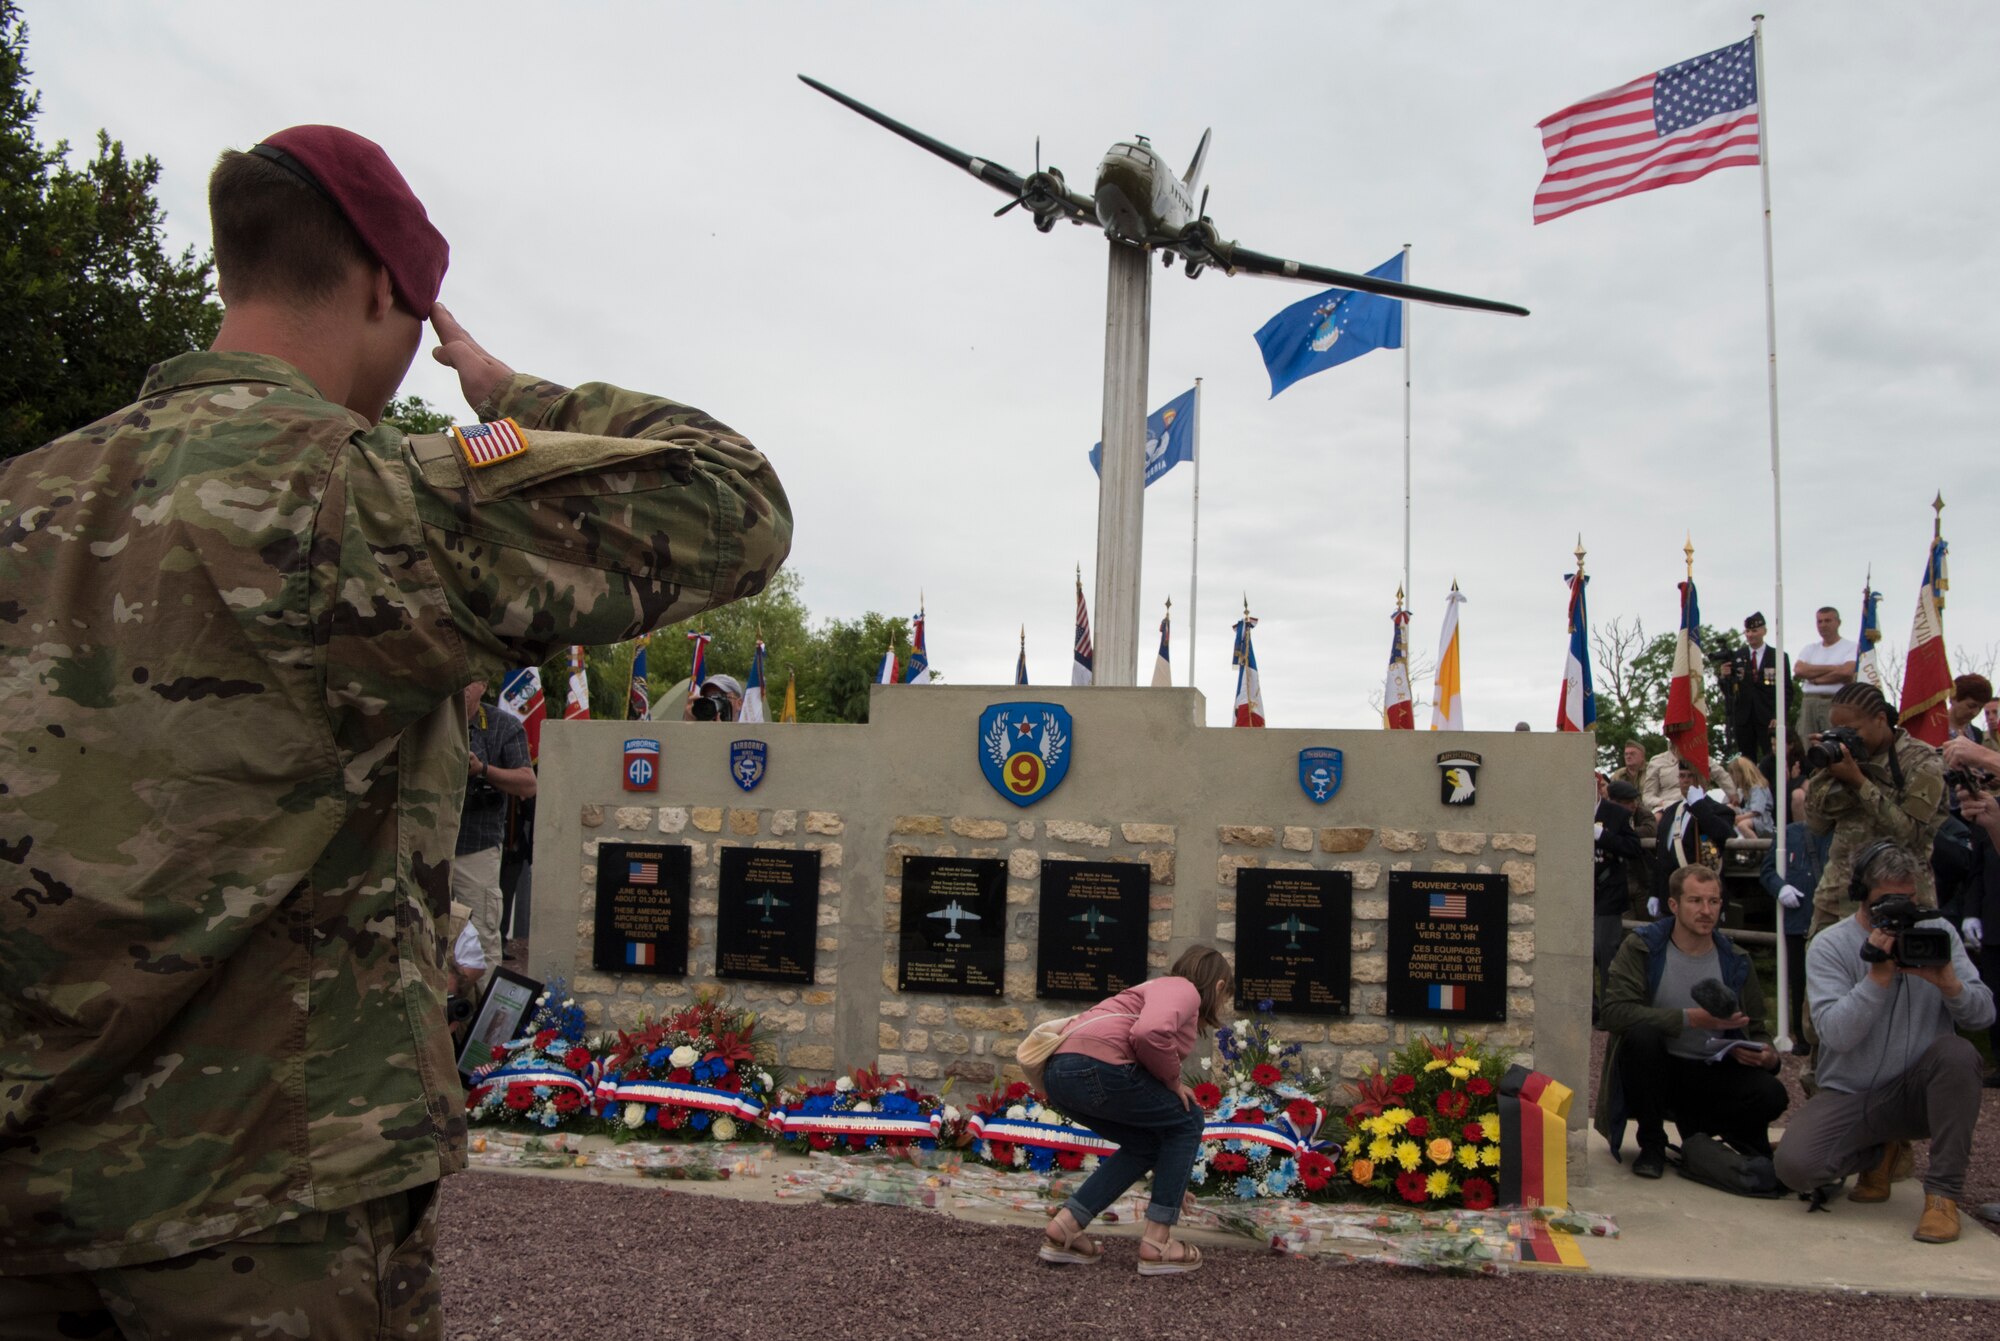 A U.S. Army airborne infantryman salutes the U.S. Air Force monument while a French child places a flower near the monument during a ceremony honoring all airborne troops and flight crew that served on D-Day in Picauville, France, June 4, 2019. Both acts honored those that paid the ultimate sacrifice on D-Day, 75 years ago. (U.S. Air Force photo by Senior Airman Kristof J. Rixmann)